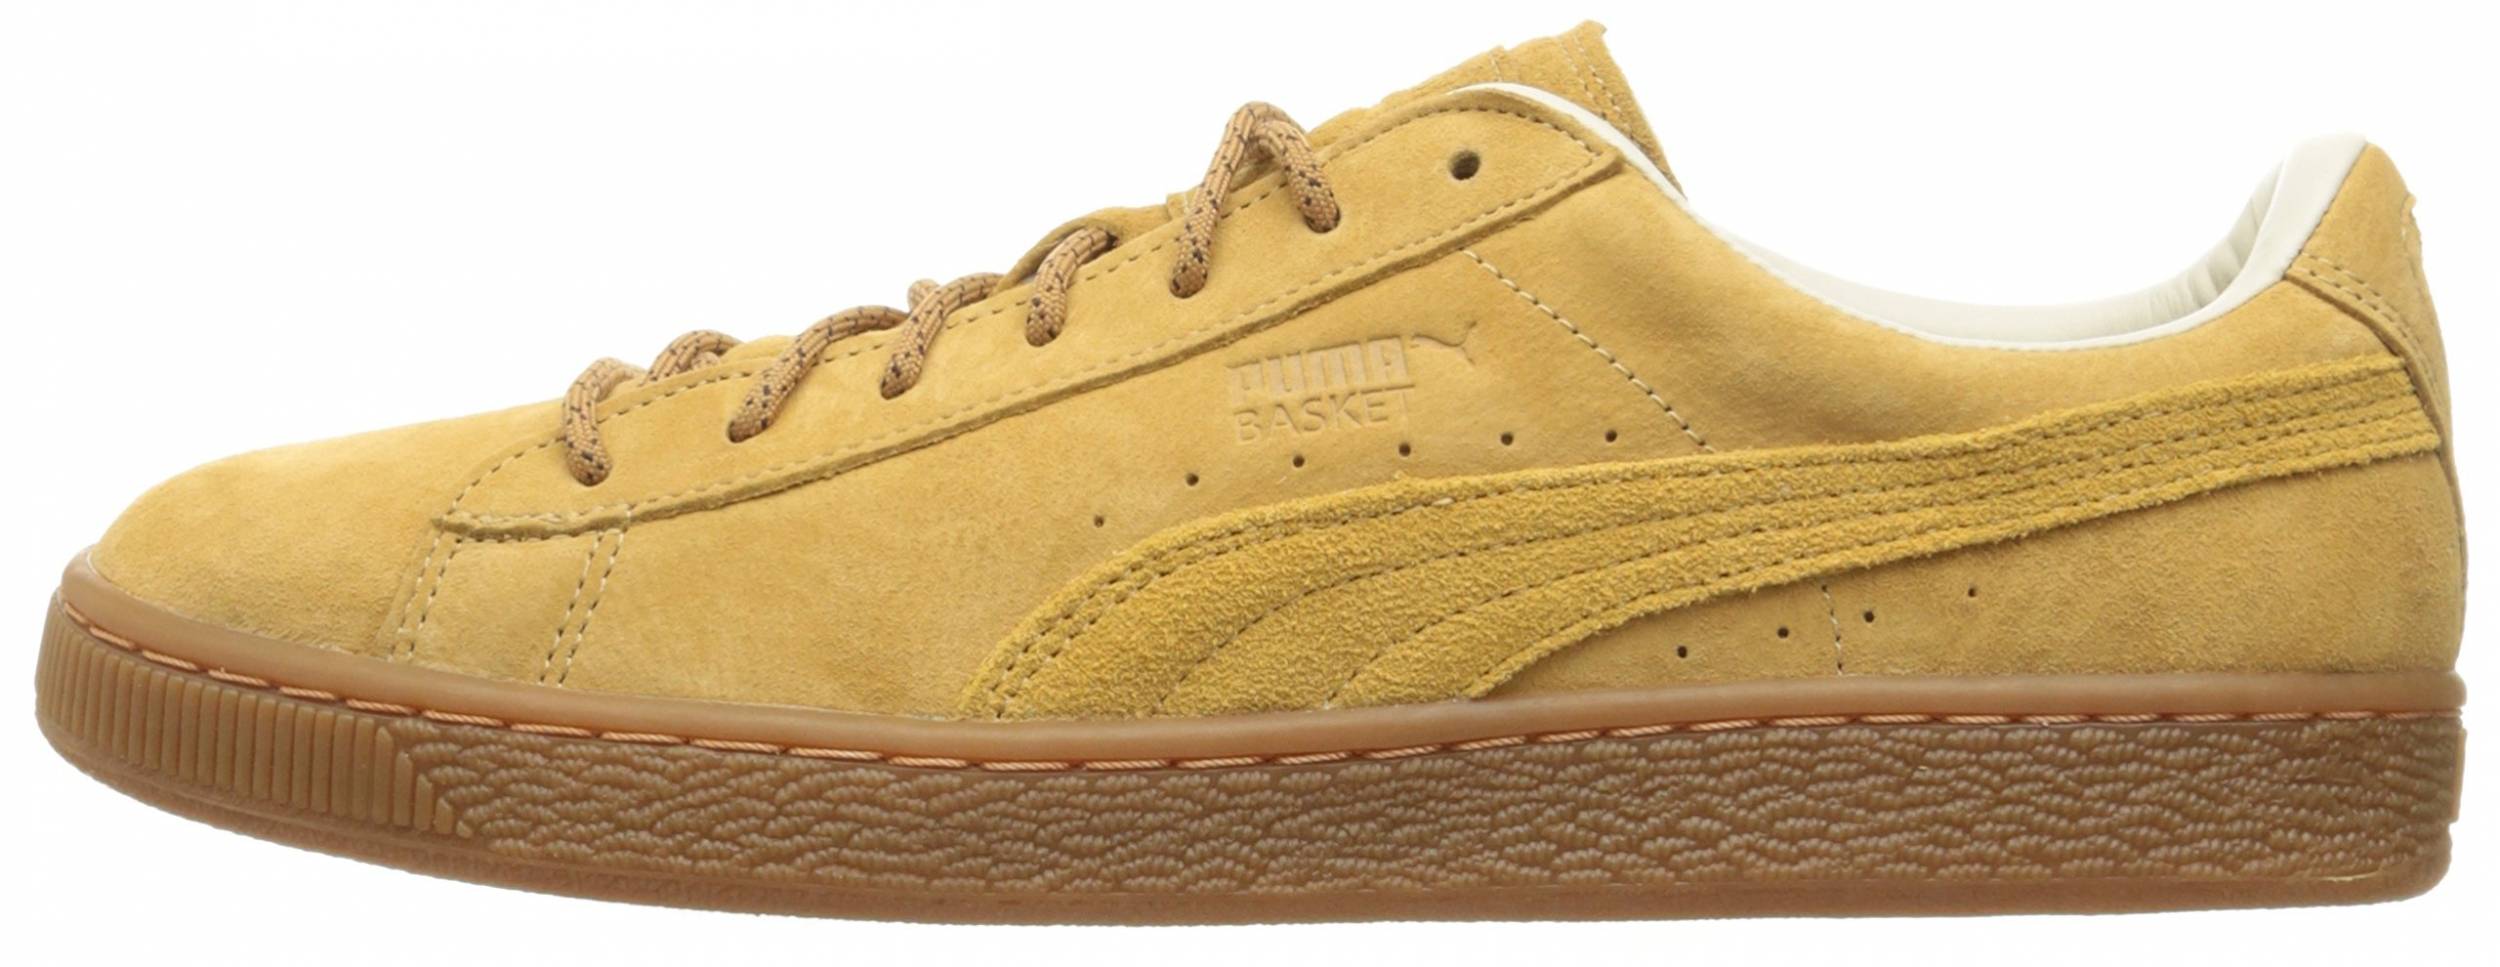 Save 38% on Yellow Puma Sneakers (5 